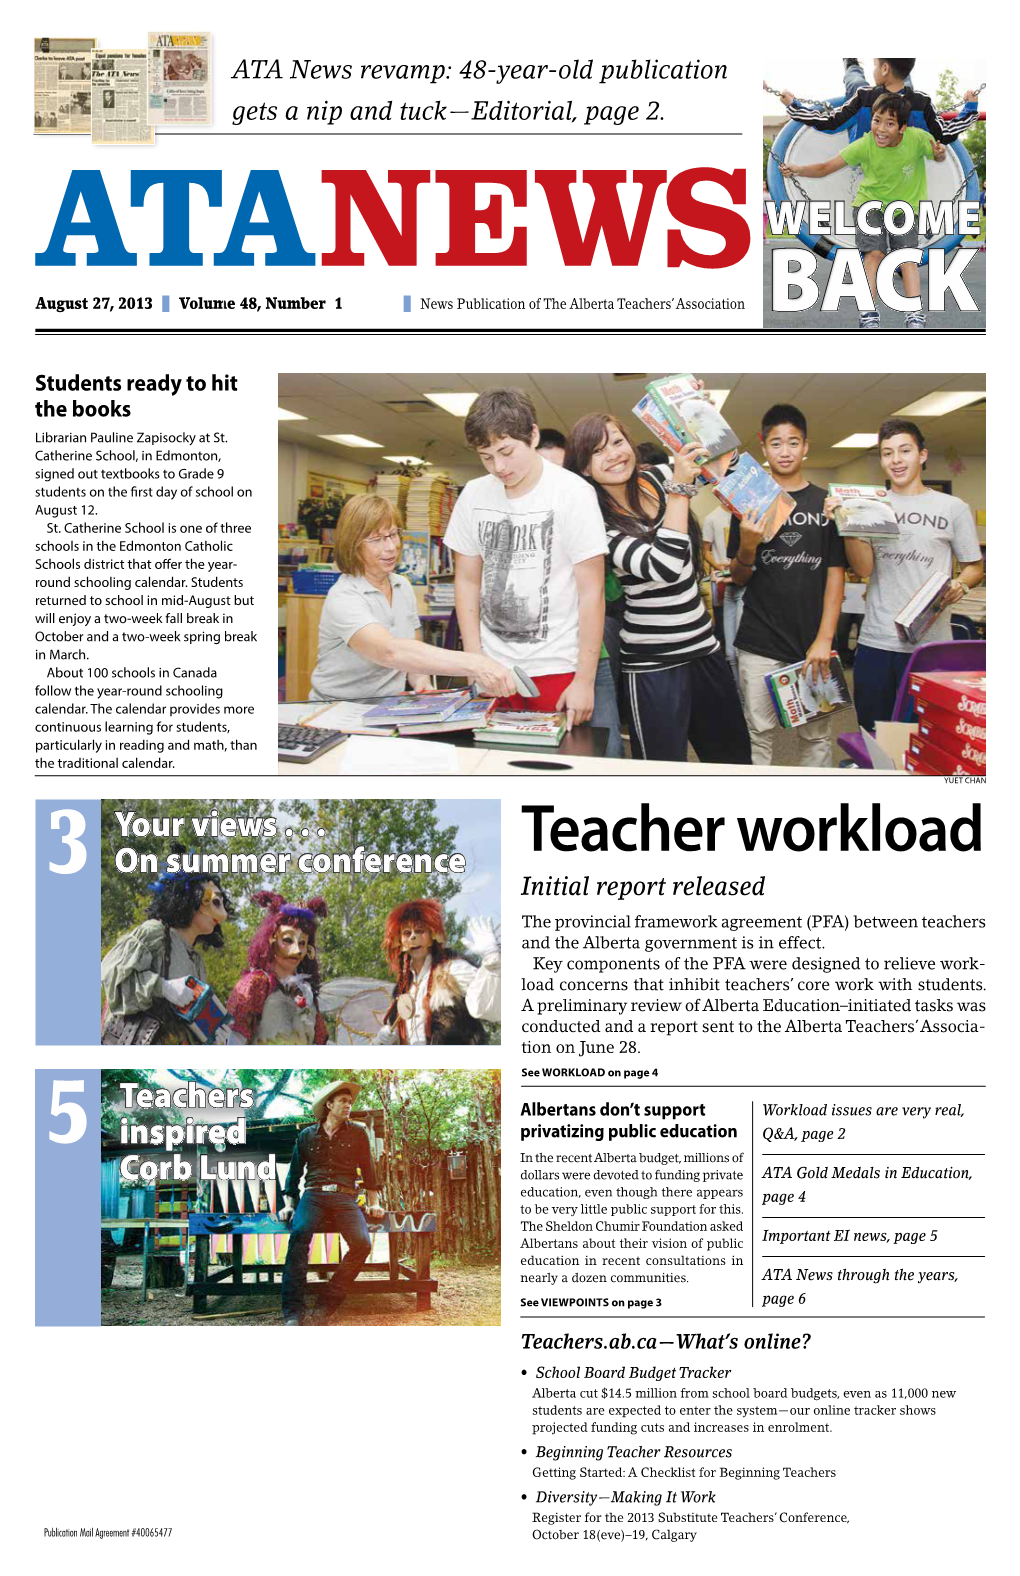 Teacher Workload 3 on Summer Conference Initial Report Released the Provincial Framework Agreement (PFA) Between Teachers and the Alberta Government Is in Effect